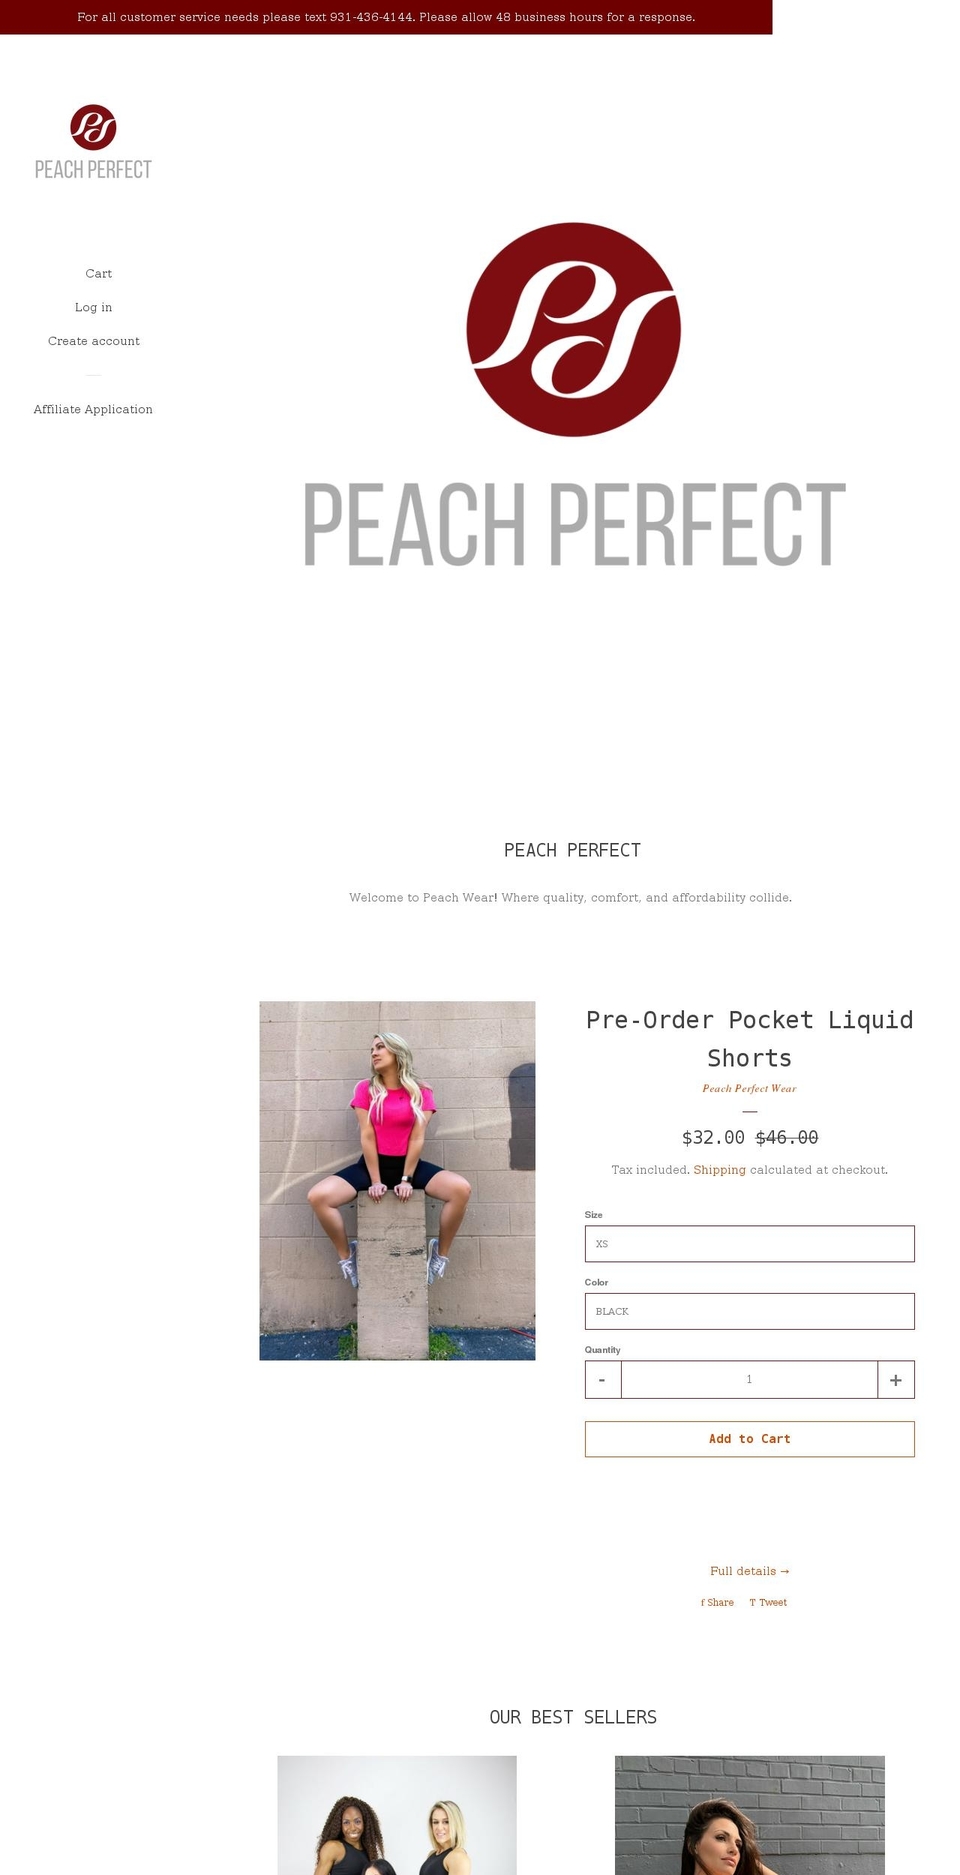 Pop with Installments message Shopify theme site example peachperfectwear.com